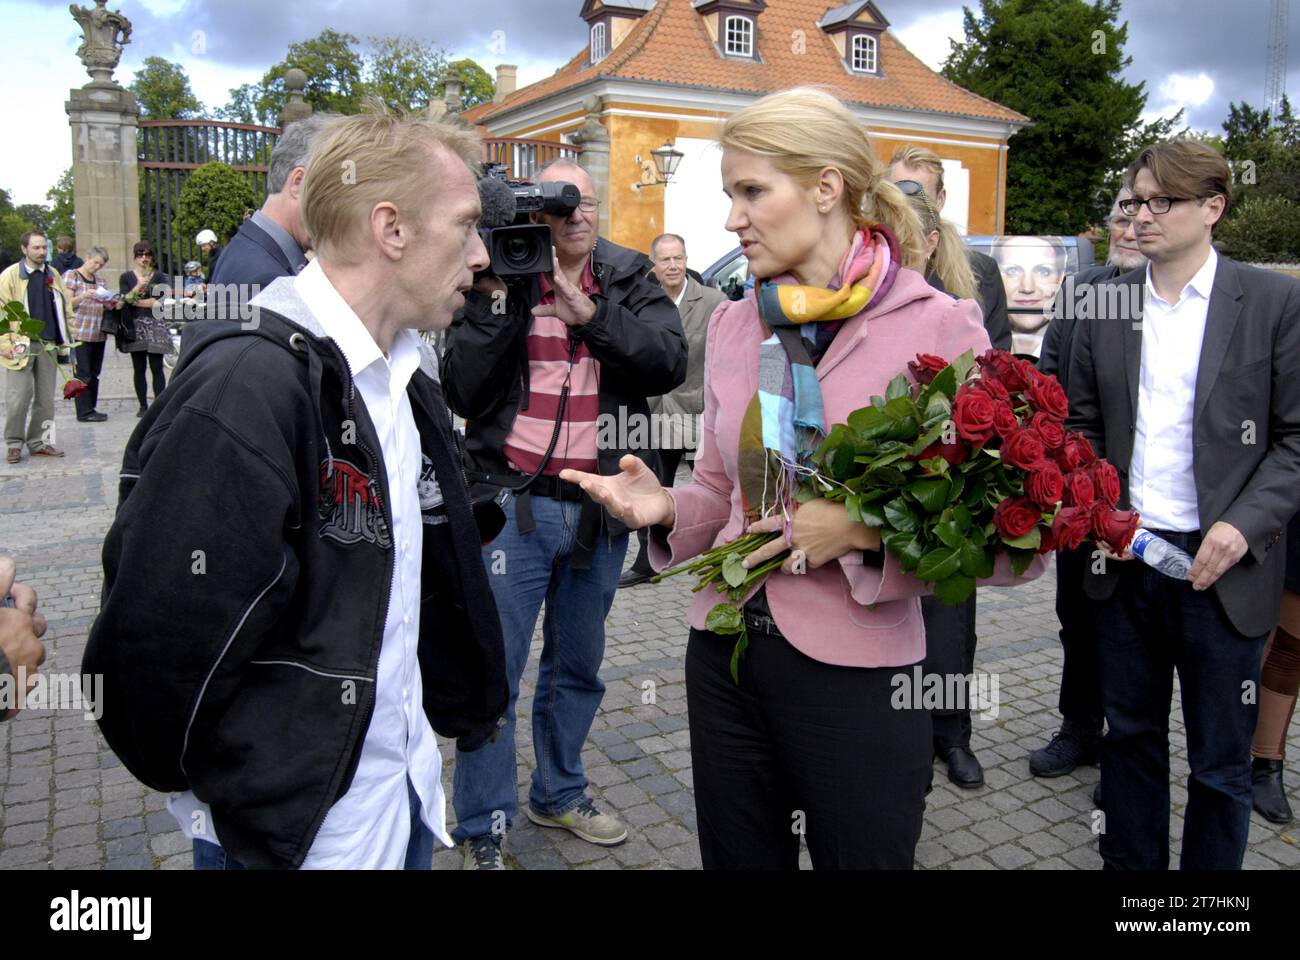 COPENHAGEN  DENMARK. Helle Thorning -Schmidt,oppostion social democrat leader and candiate for prime minister post for social democrat party on her elections compaign,meet her voters and some are really angry social democrat ,Helle met her party soldiers /workers and danish voter, danish General parliament elections will take plass on sept.25, 2011, Helle today spends her morning at frederiksberg have gives free red roses to voters, she met her muslim member of parlia from Turkey and Pakistan, these are cadidate for parliaments 28 August 2011                (PHOTOS BY FRANCIS JOSEPH DEAN/DEAN Stock Photo